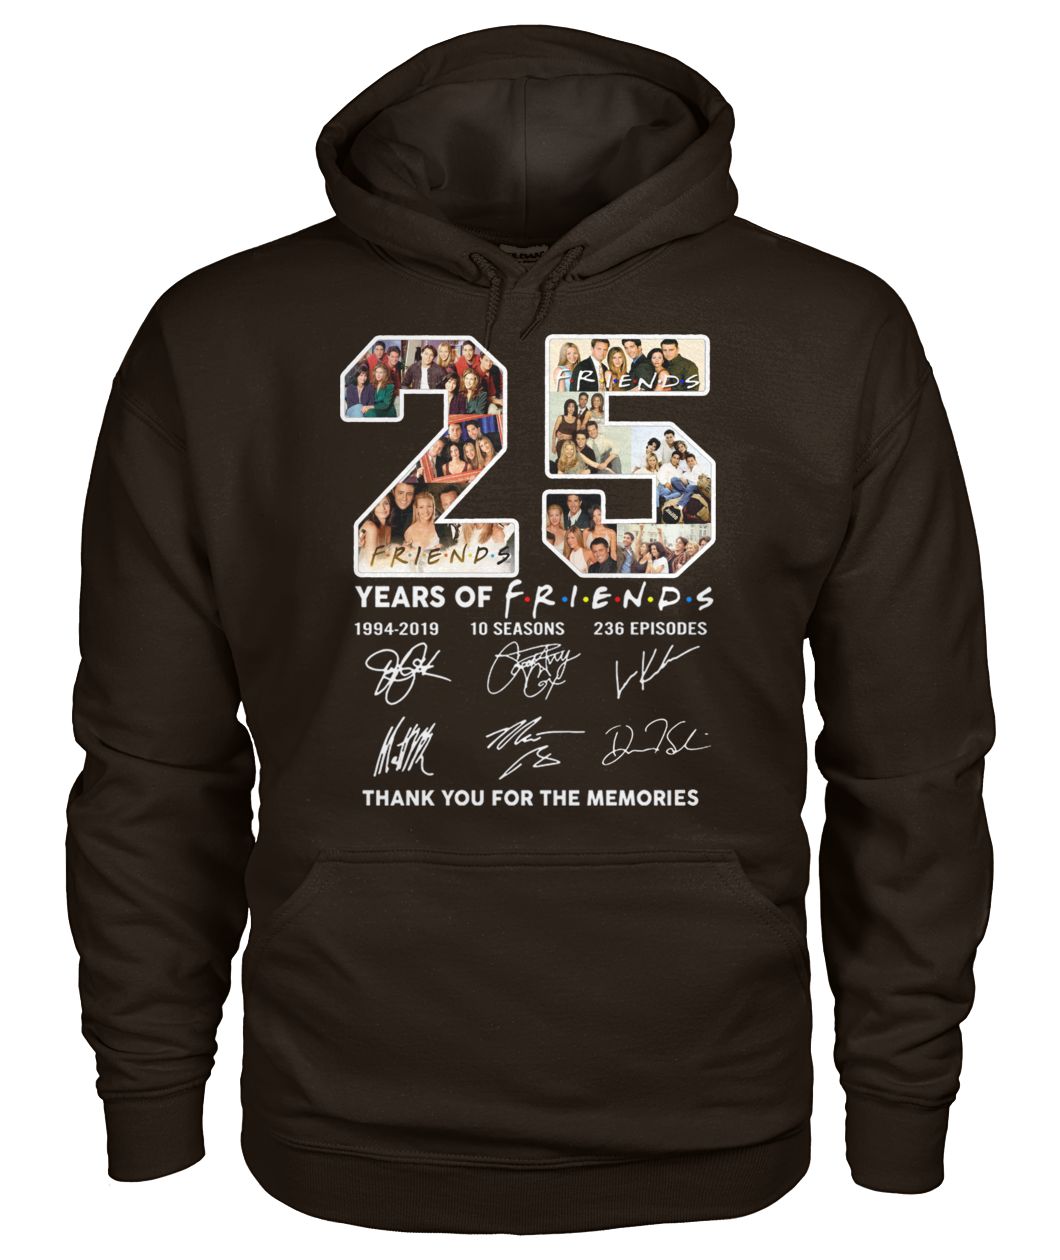 25 years of Friends 1994 2019 10 seasons 236 episodes signature thank you for the memories gildan hoodie